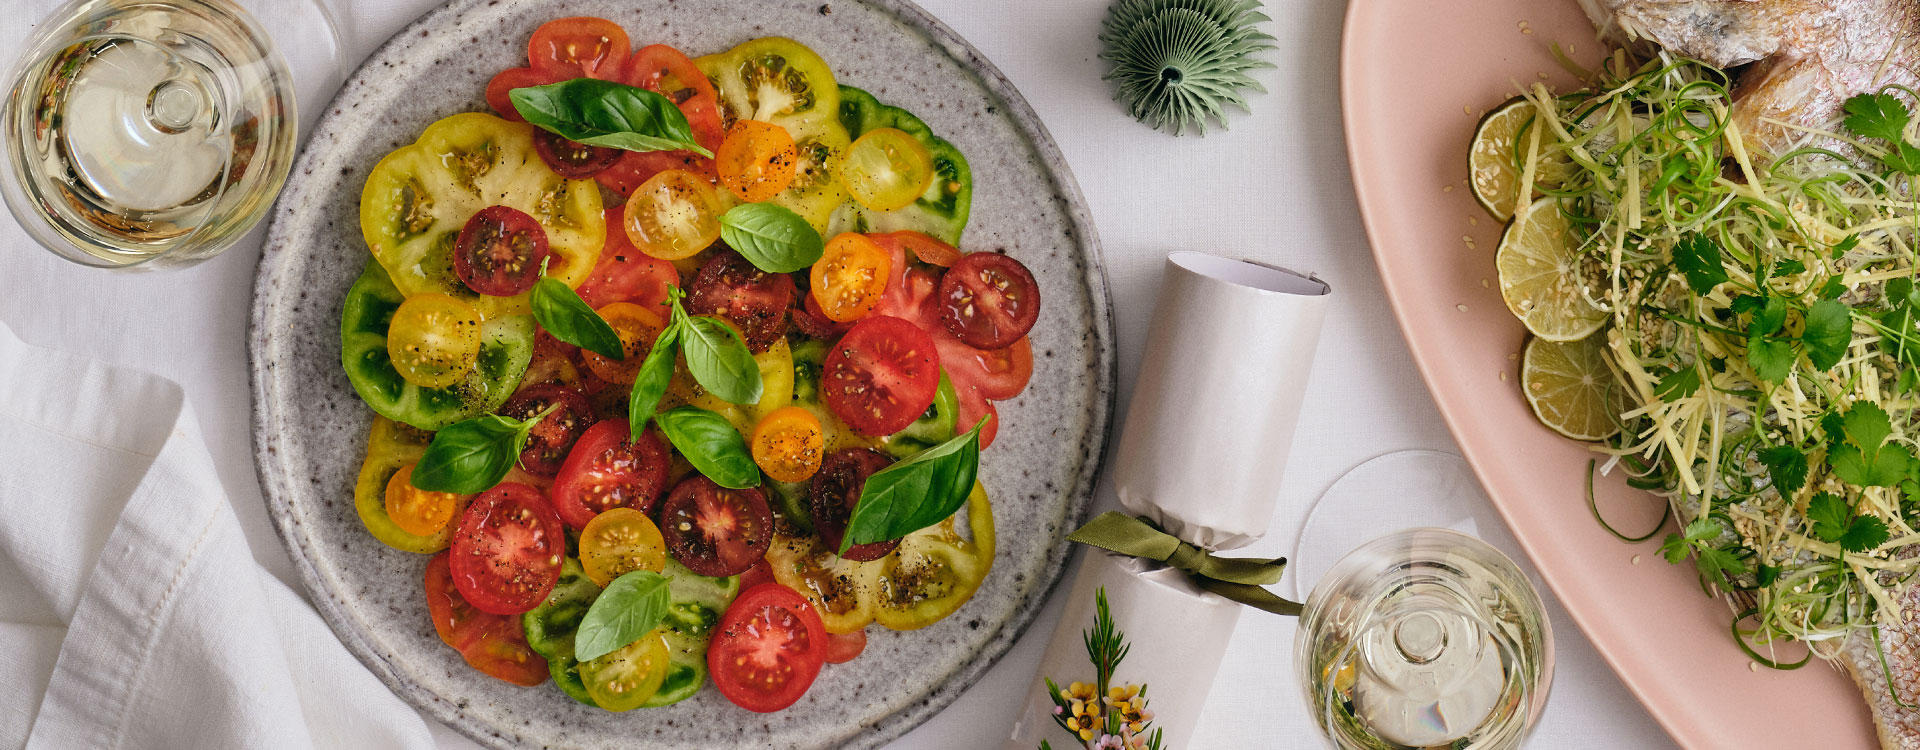 A Fresh Tomato Salad to Brighten Your Table